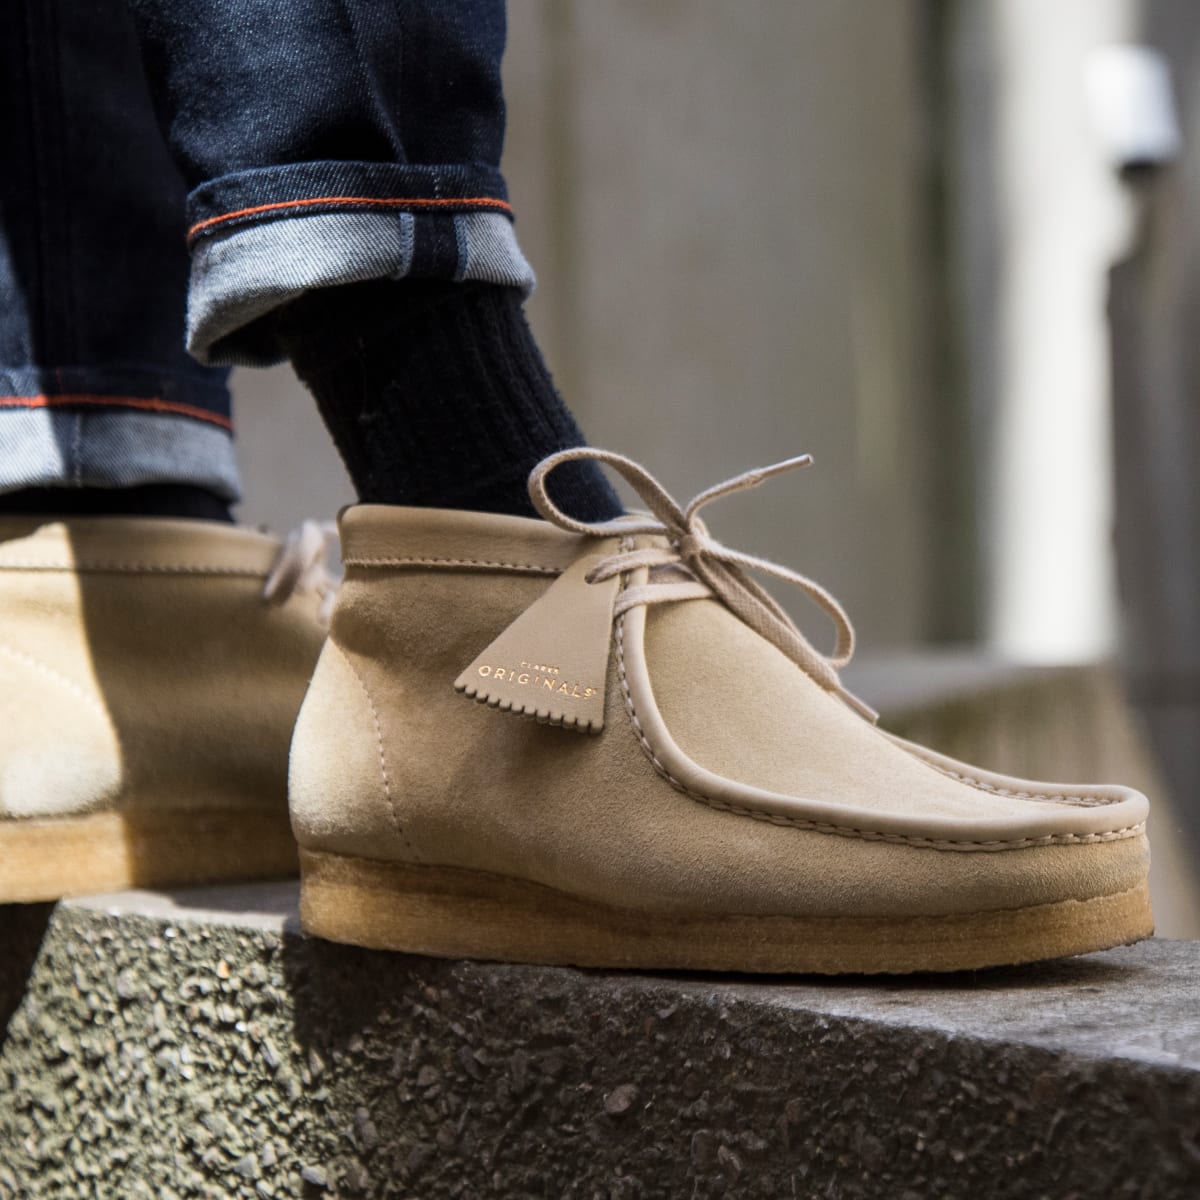 wallabee type shoes